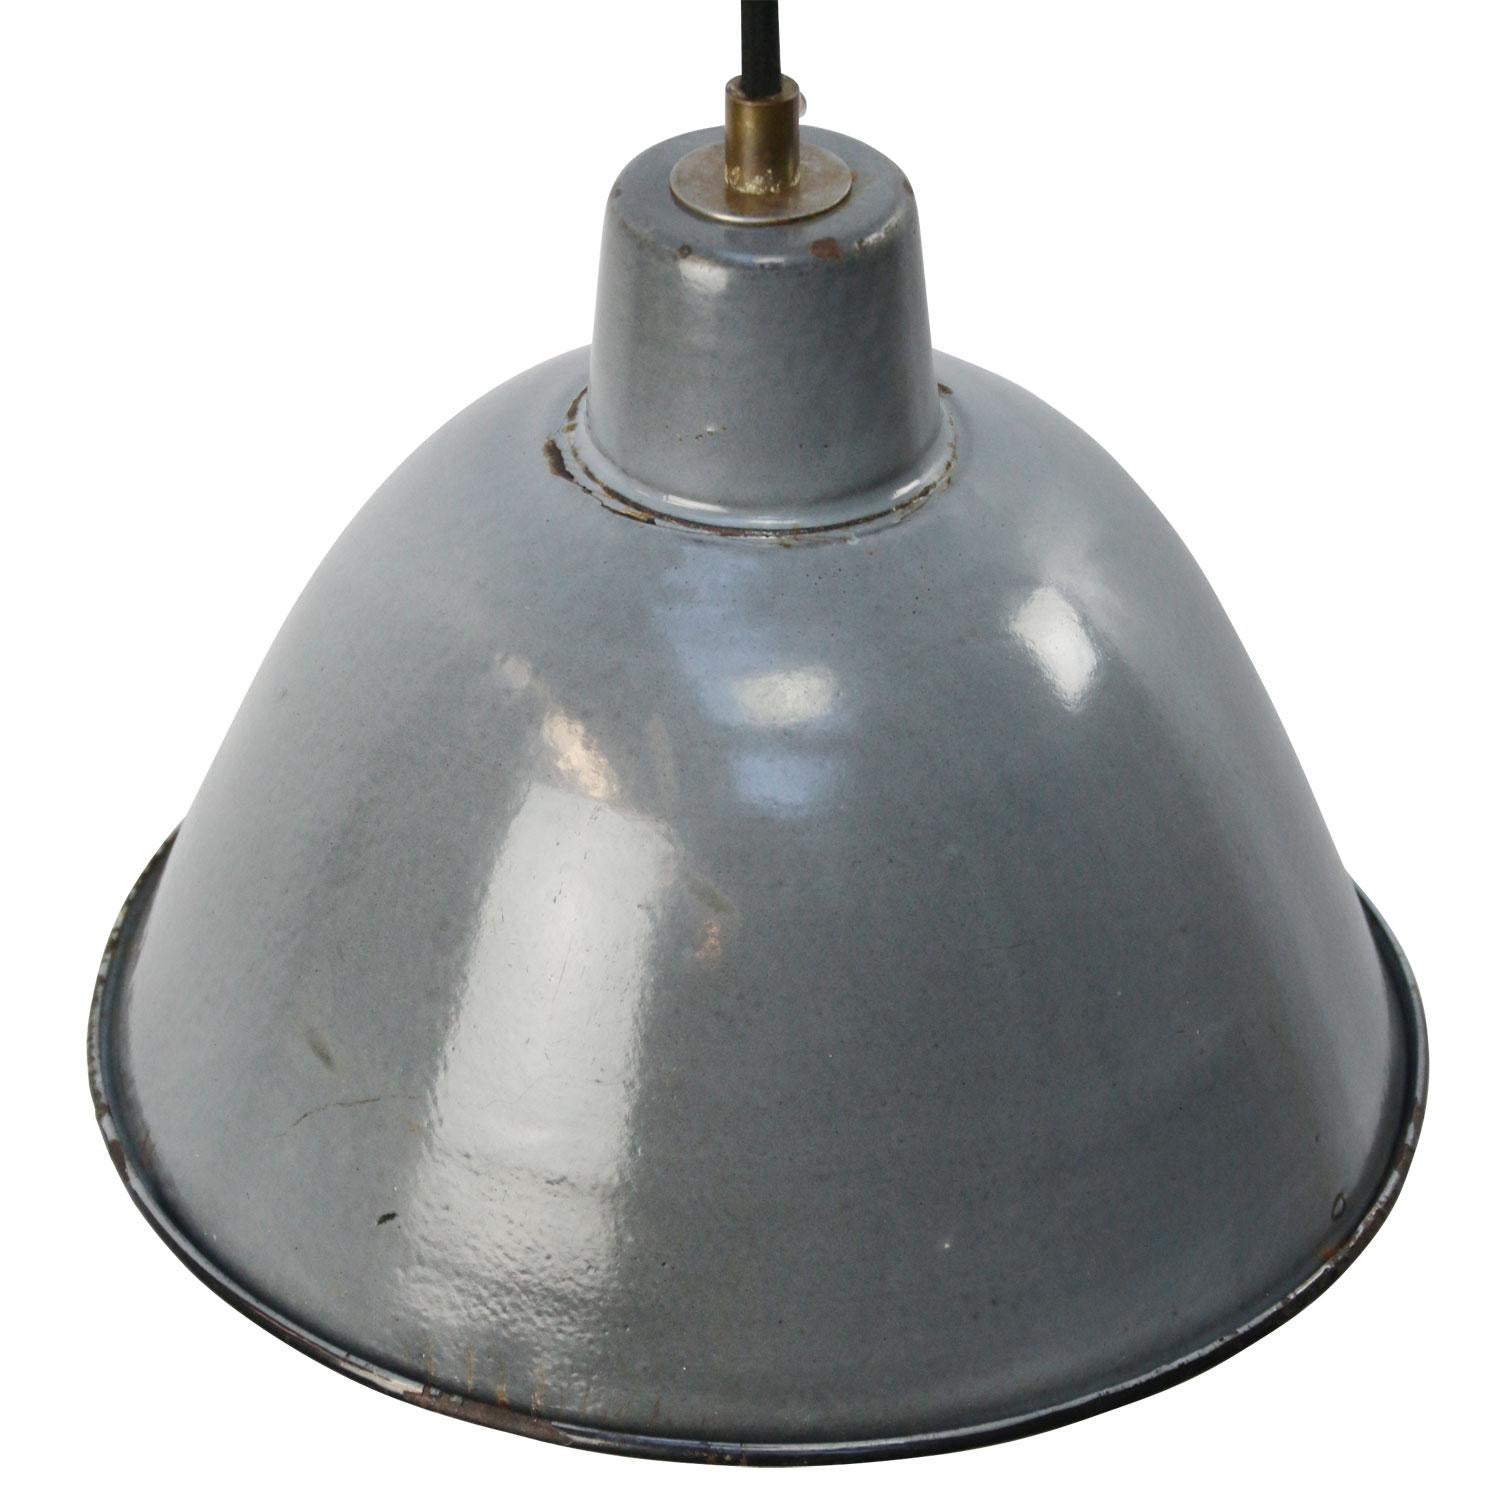 Factory hanging light
Gray blue enamel, black type, white interior

Weight: 0.80 kg / 1.8 lb

Priced per individual item. All lamps have been made suitable by international standards for incandescent light bulbs, energy-efficient and LED bulbs.